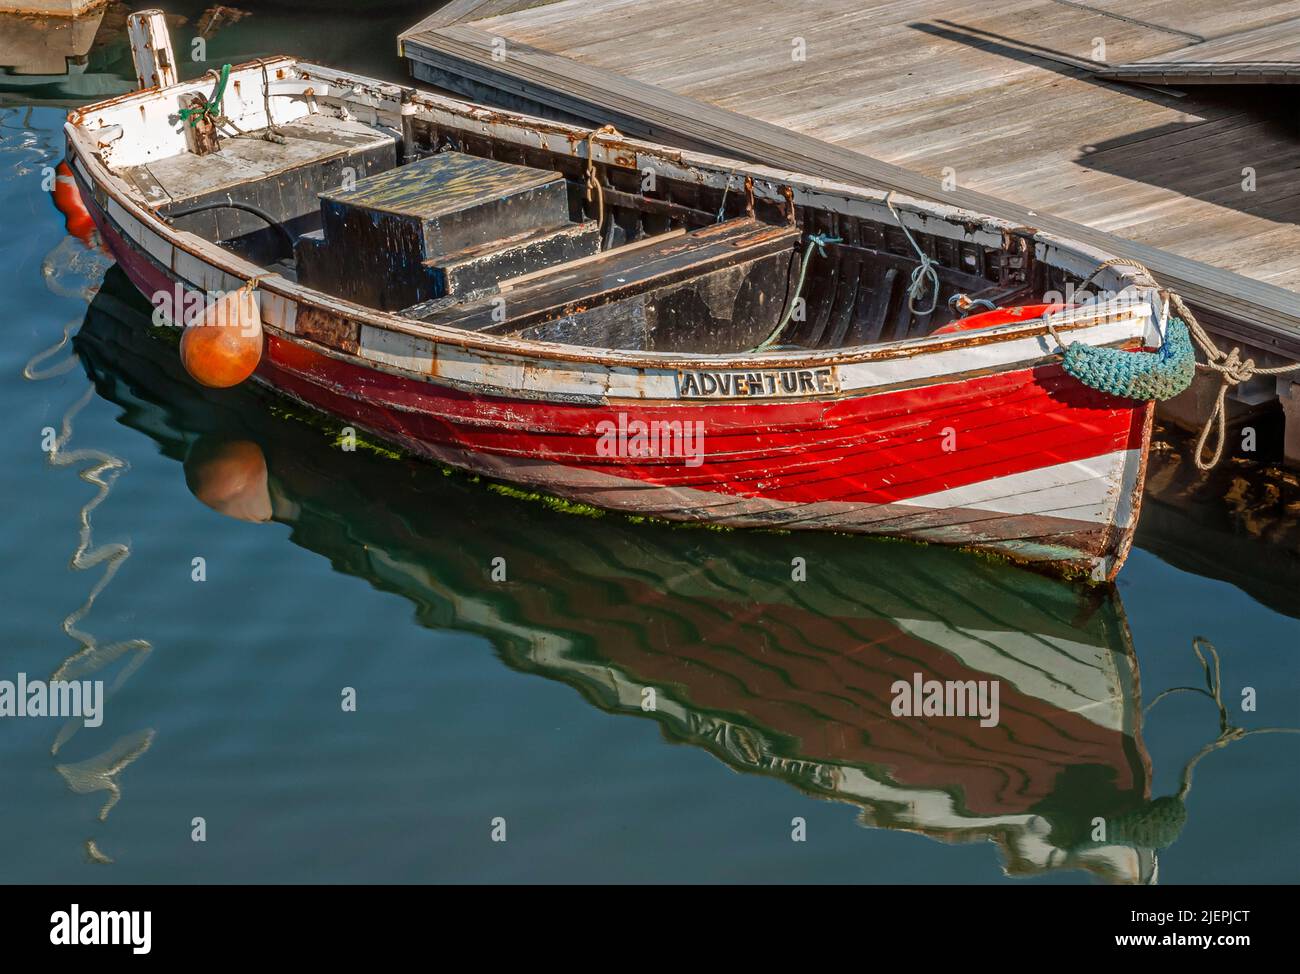 Small red Fishing Boat, named 'Adventure' in the Harbour of Scarborough, North Yorkshire, England Stock Photo